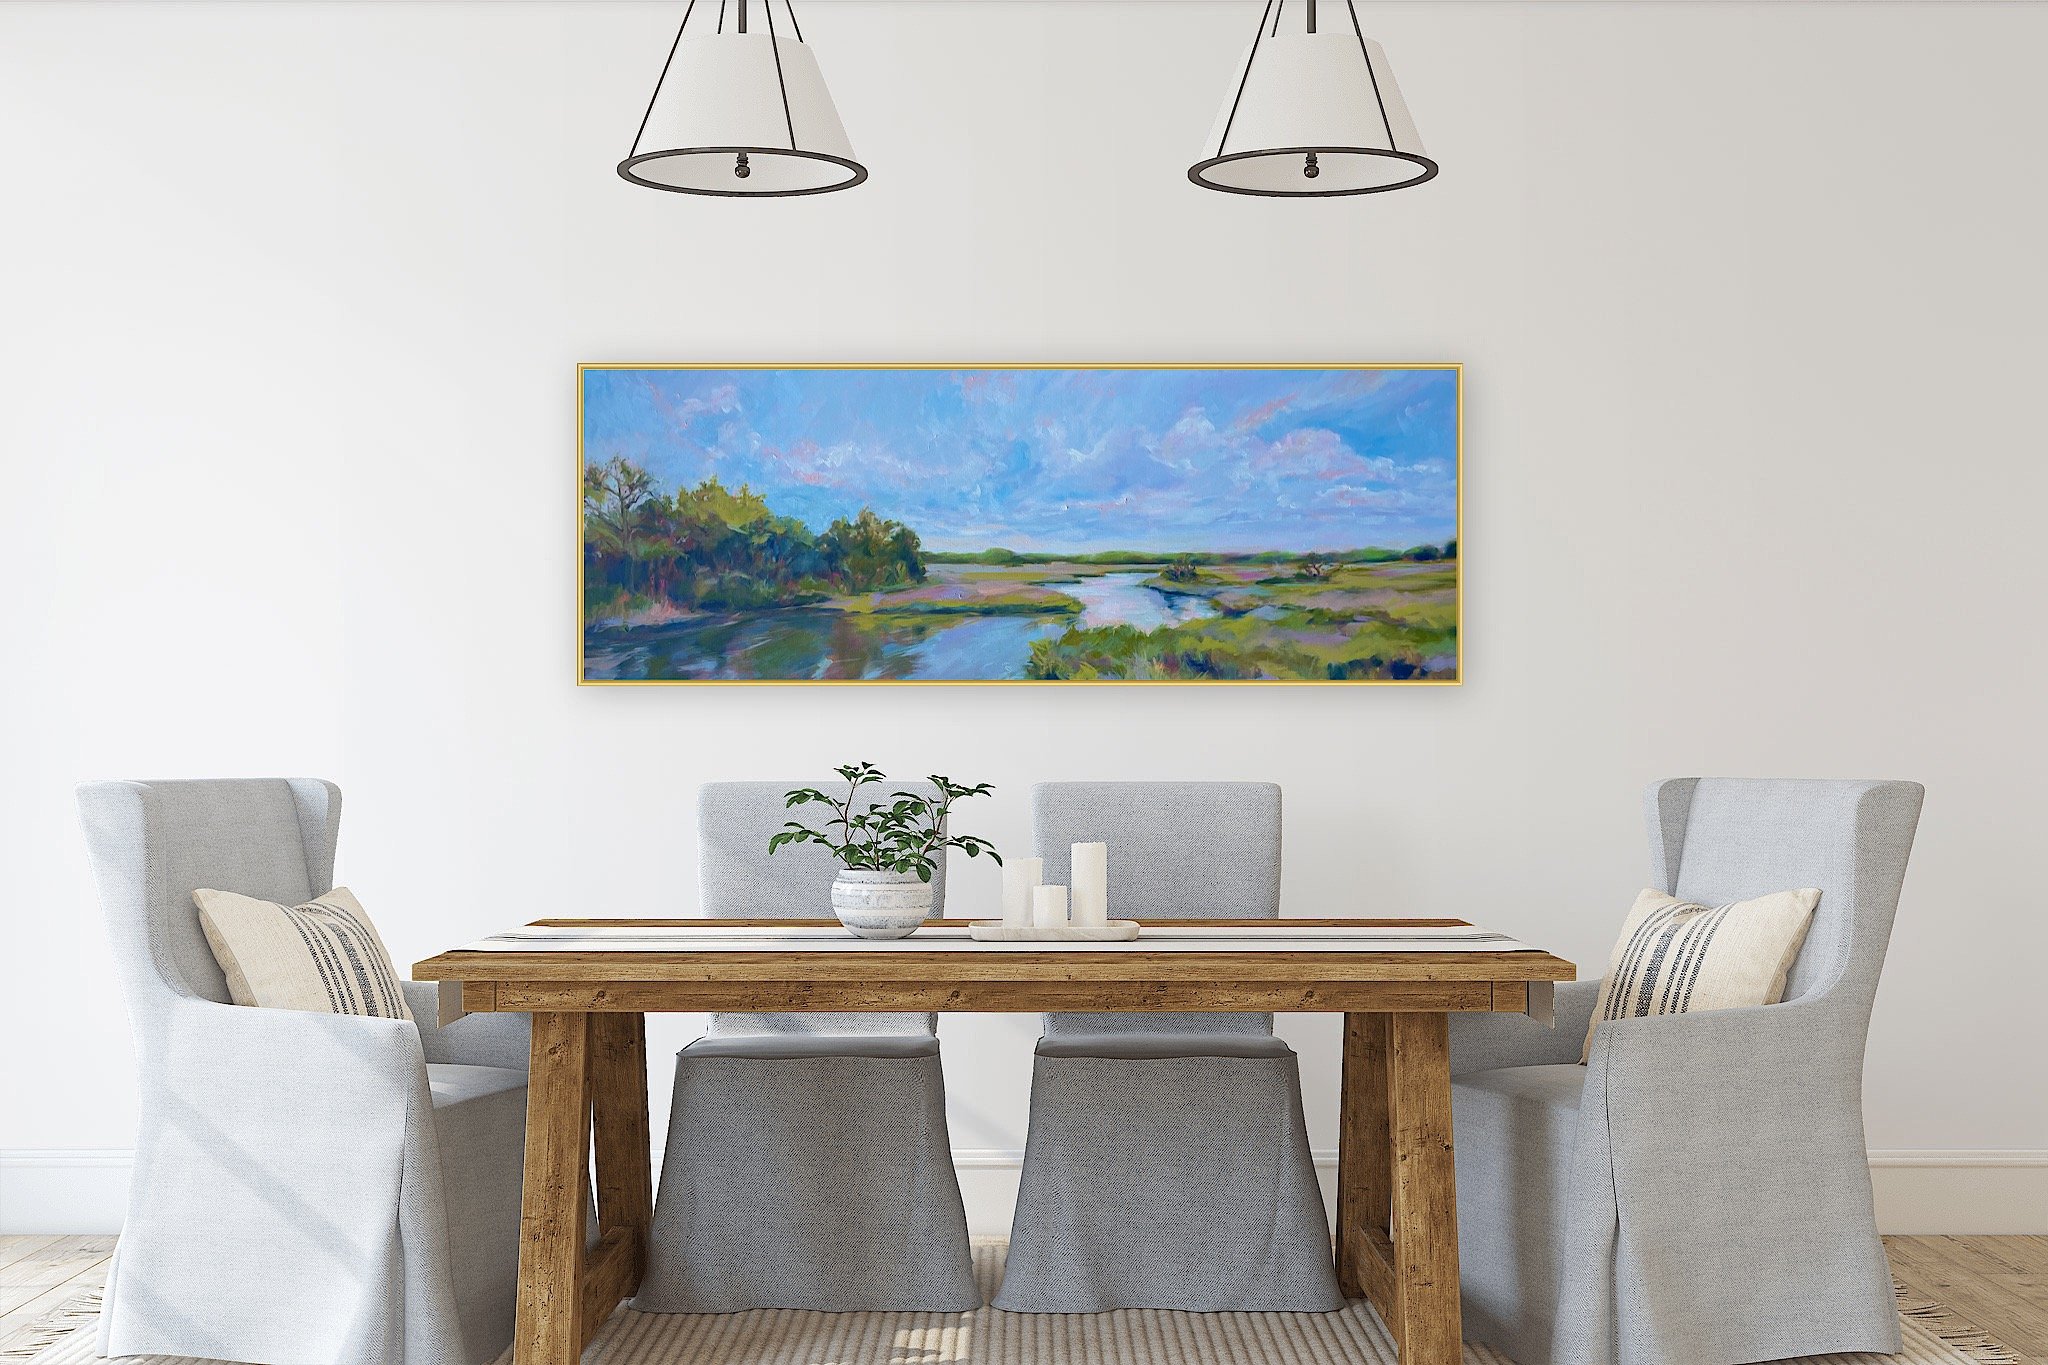 long-marsh-Katie-podracky-painting-marsh-art-colorful-painterly-impressionist-impressionistic-learn-to-paint-print-giclee.JPG